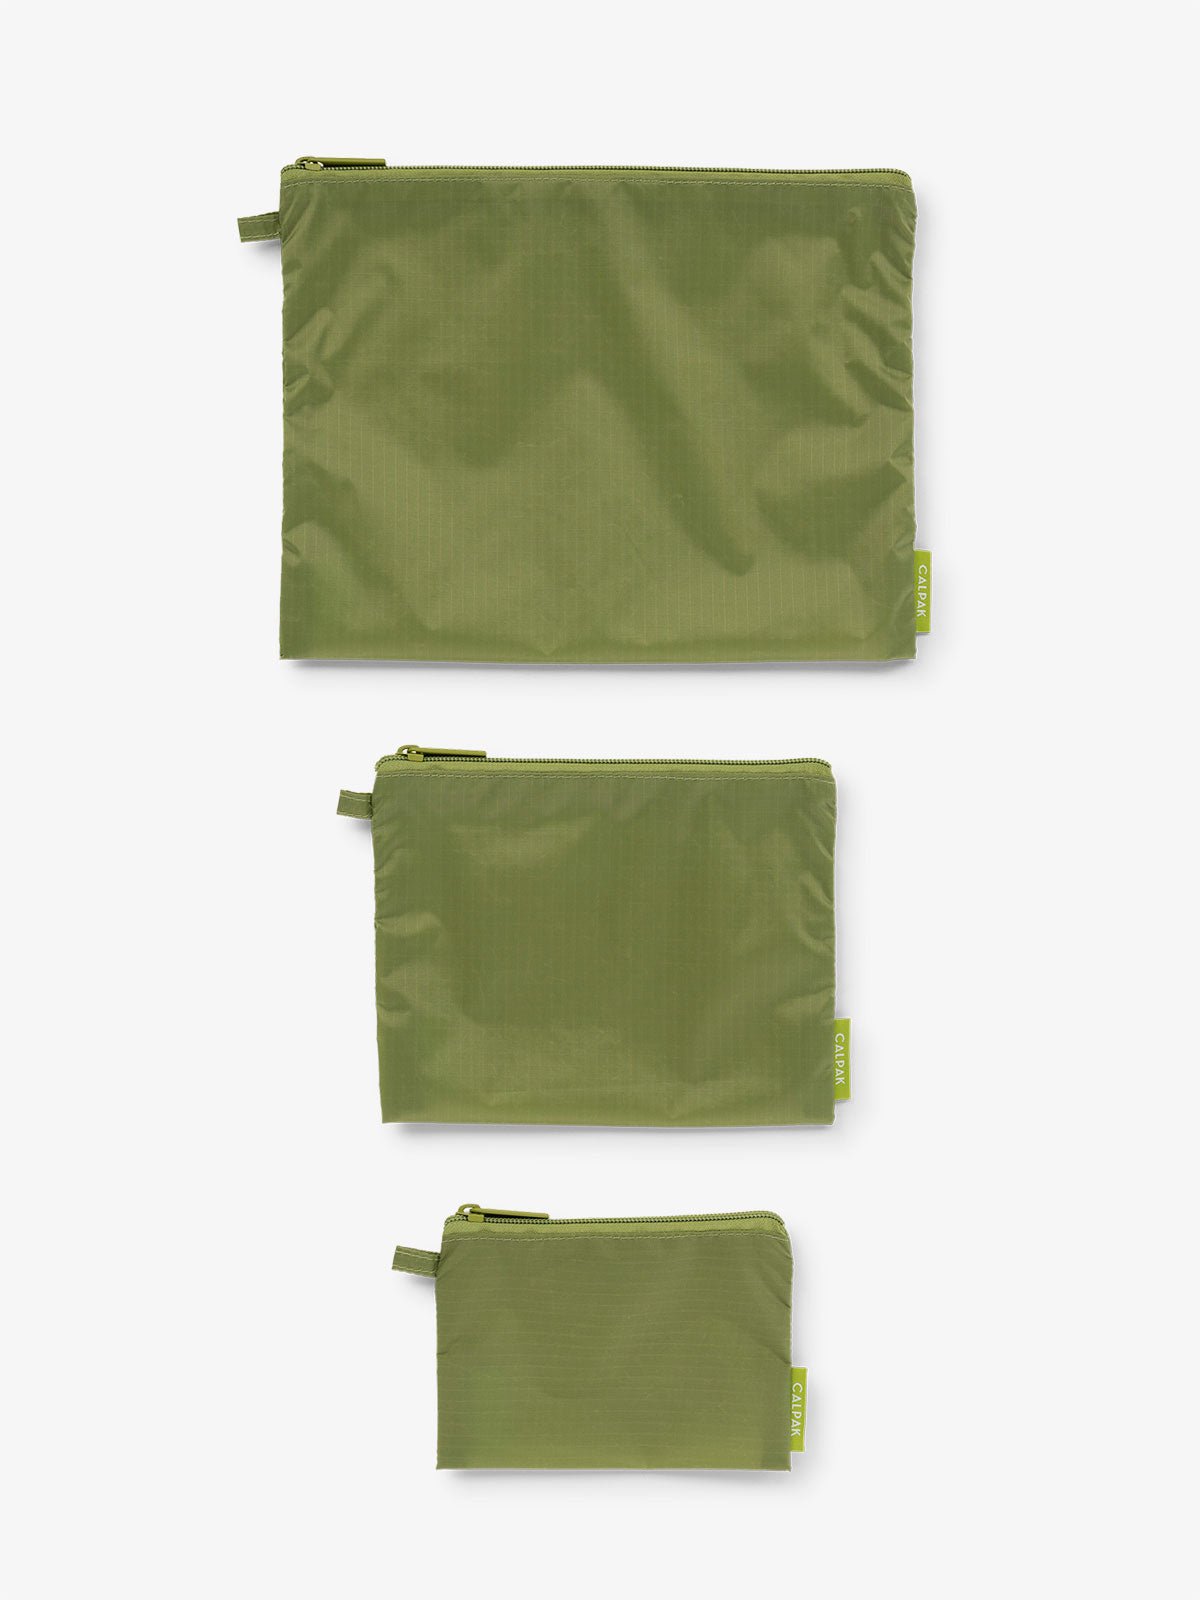 CALPAK Compakt water resistant zippered pouch set for organization in green